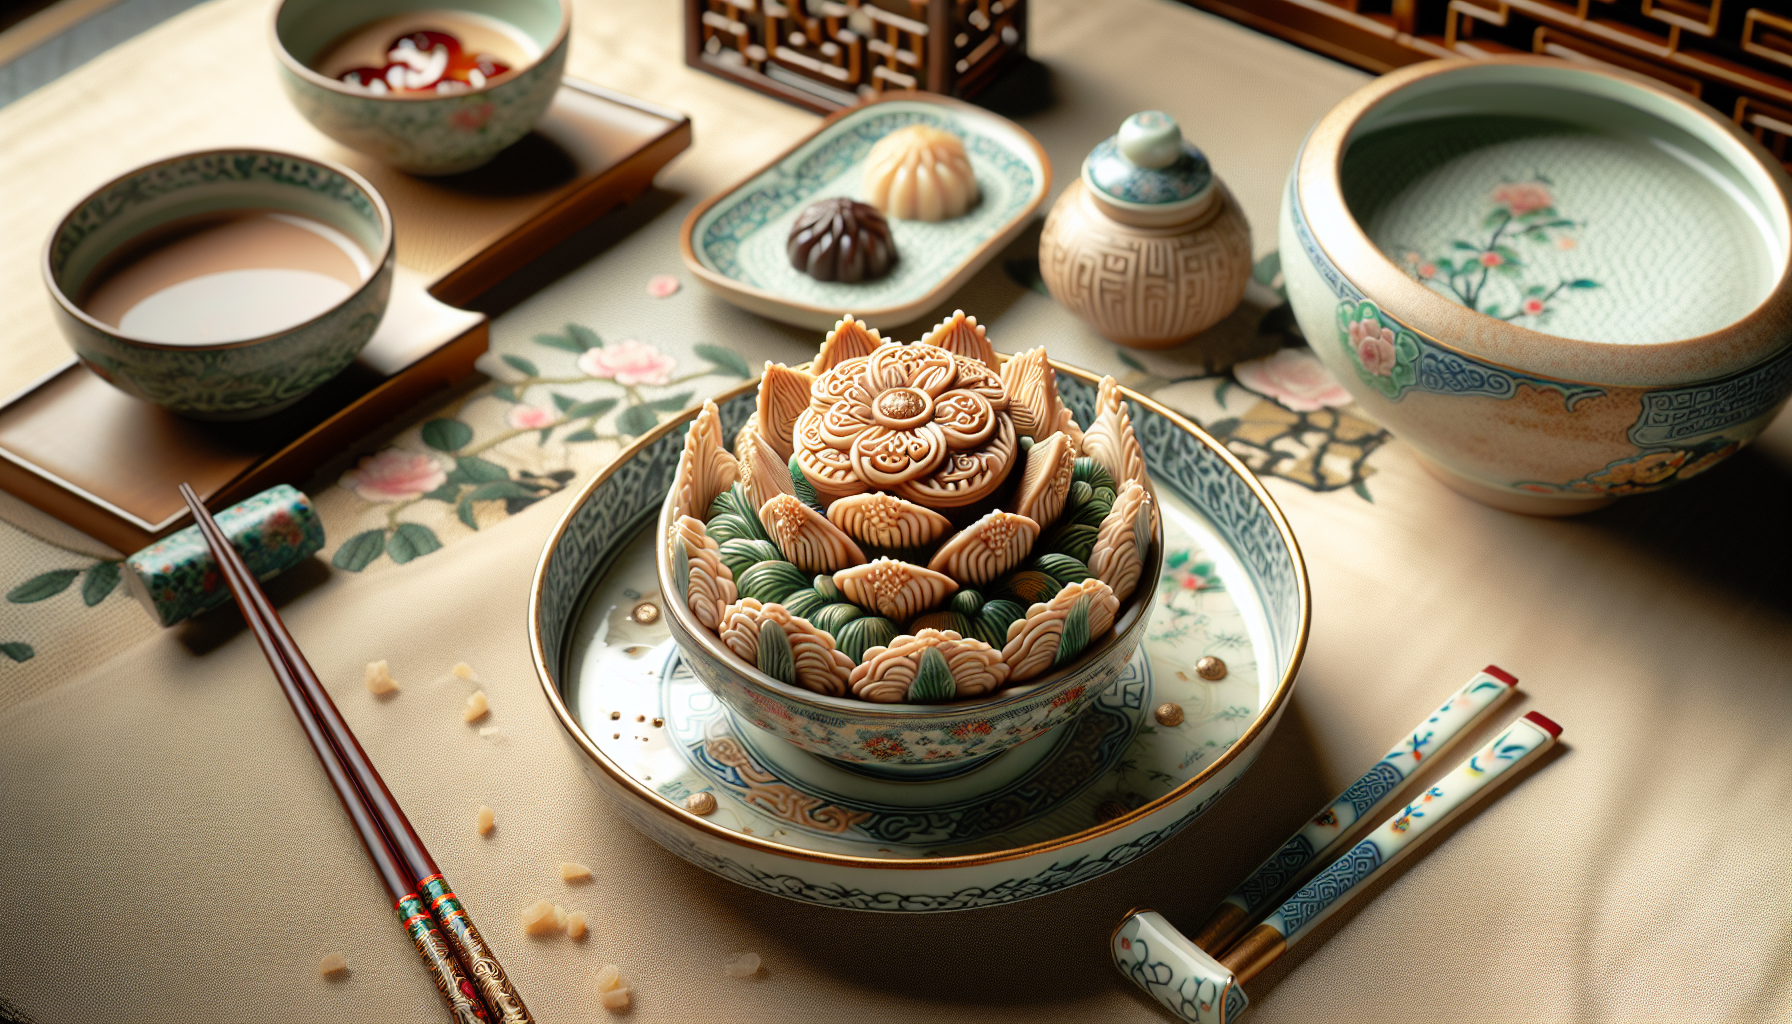 Can You Suggest A Comforting Chinese Dessert Thats Perfect For Entertaining?